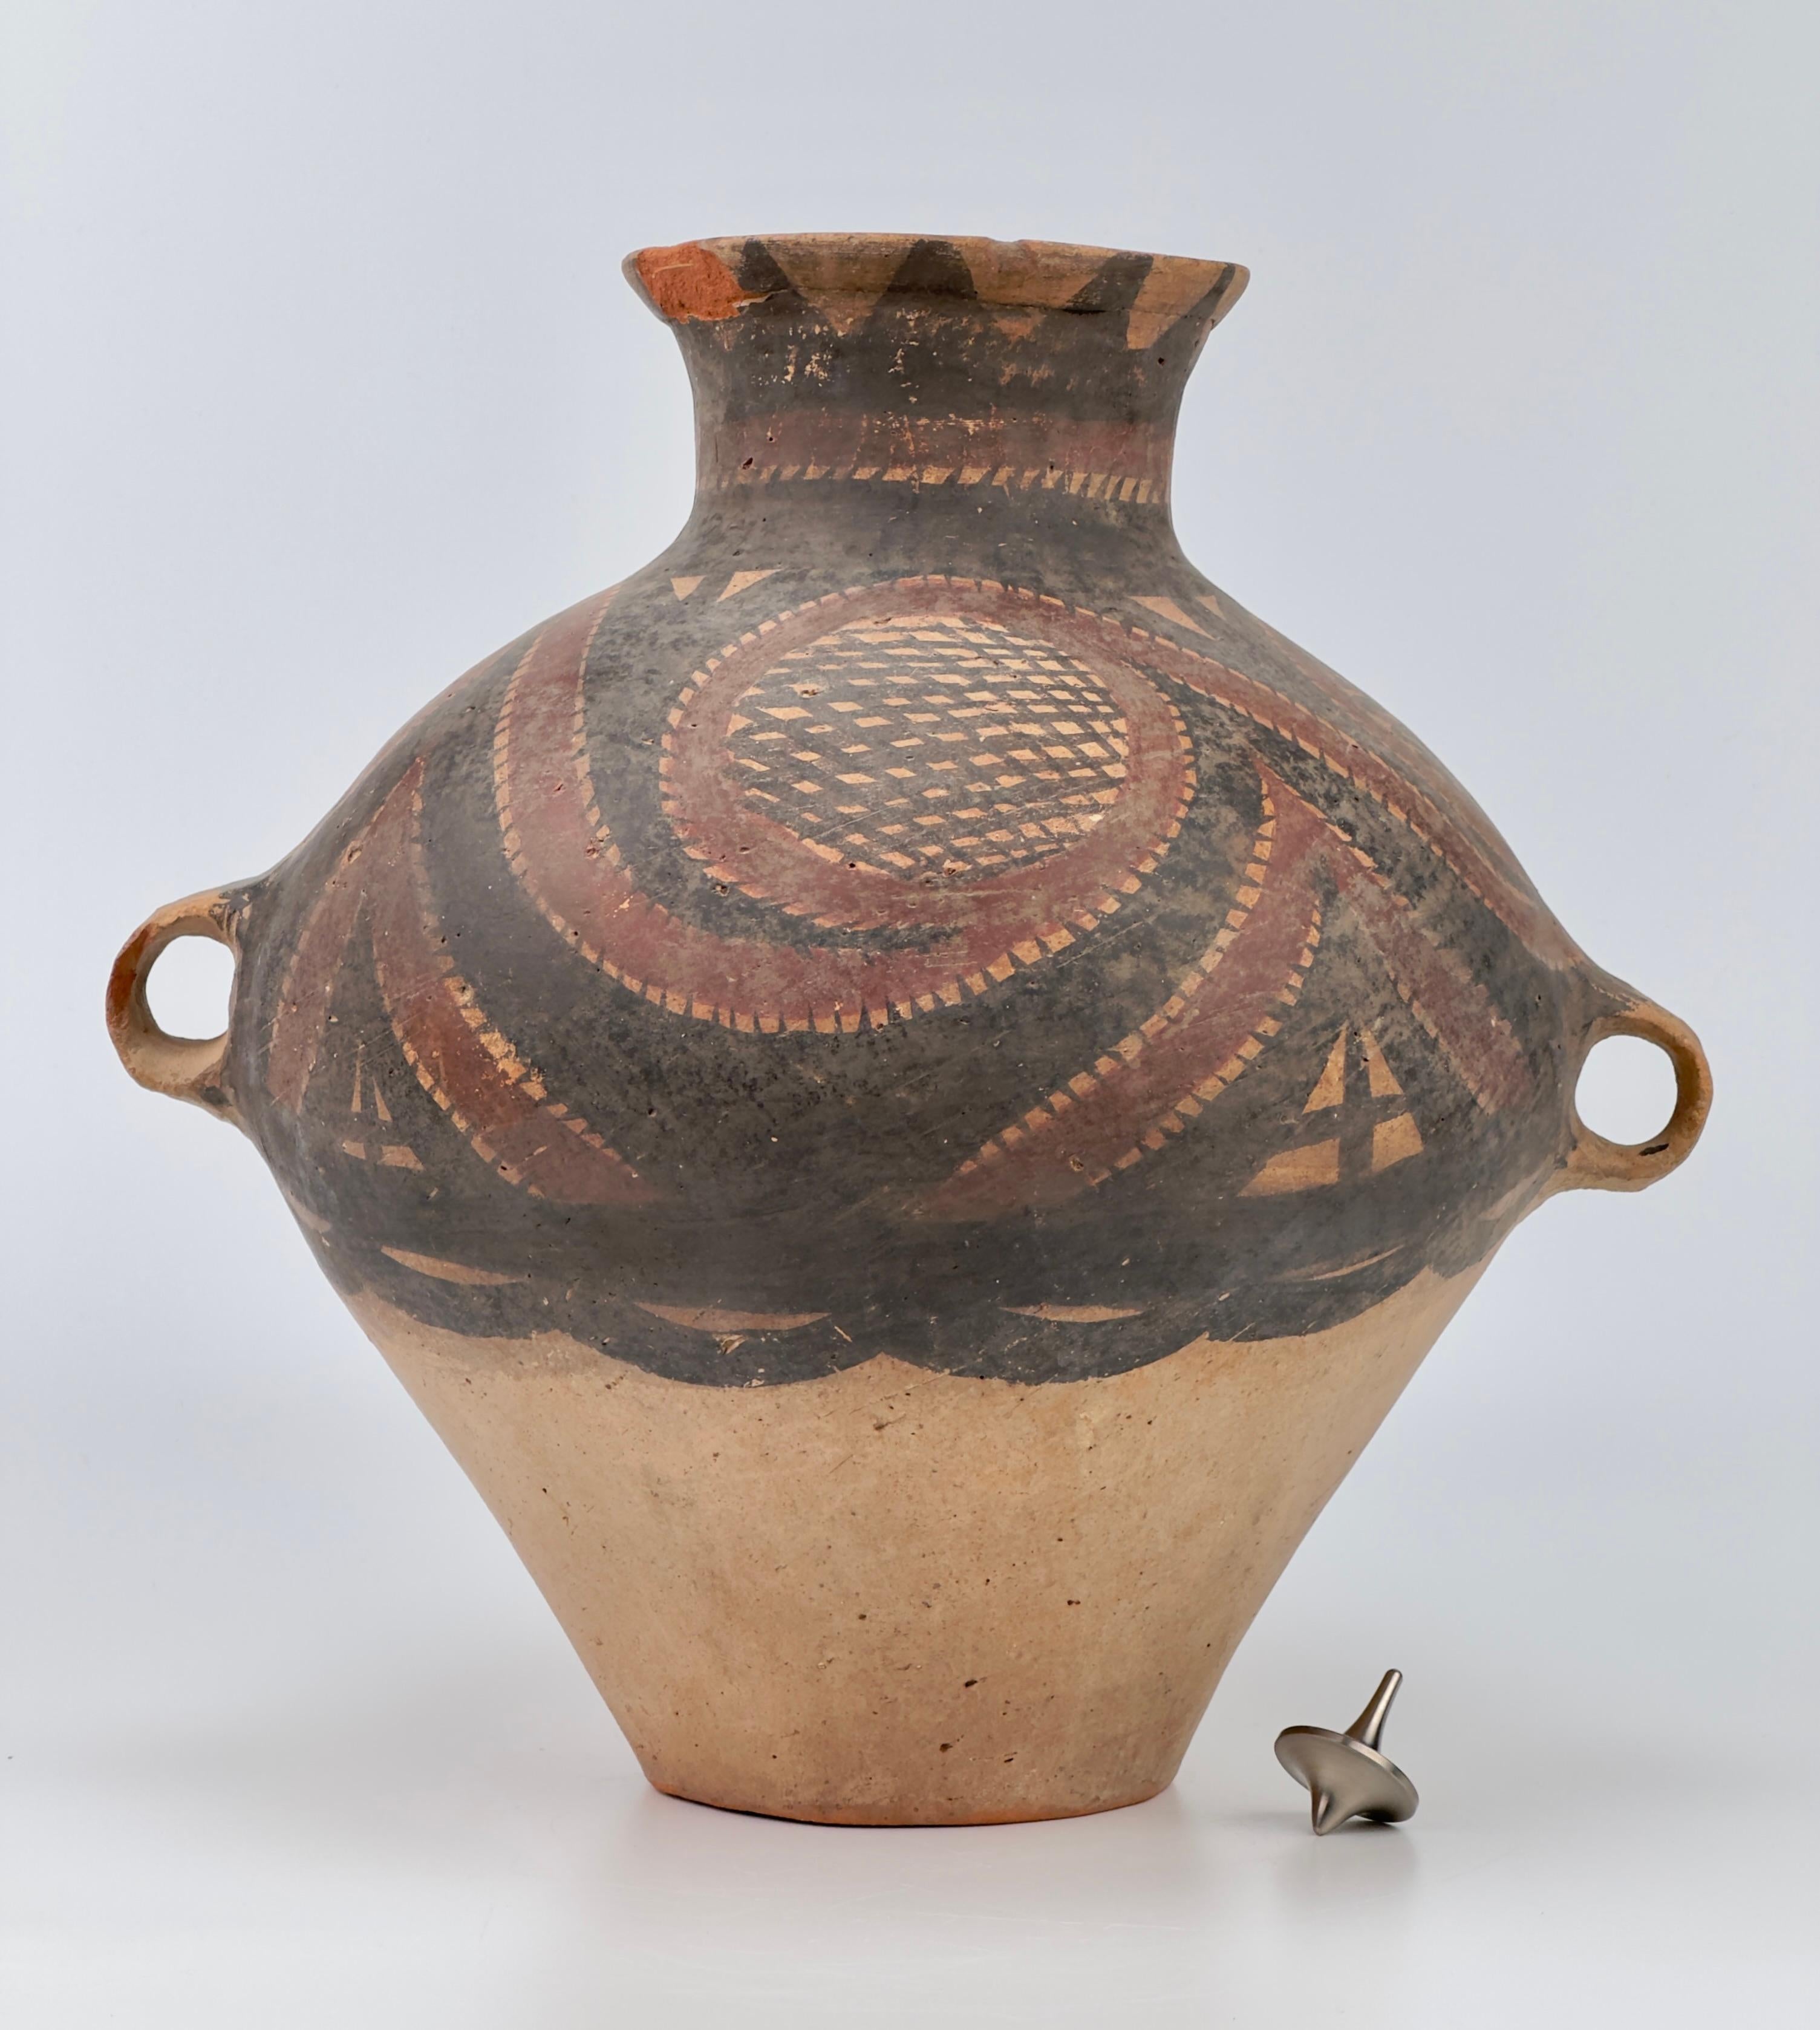 Large and small two-handled jars, pitchers, bowls, and beakers are the most common forms produced during the Machang phase of the Majiayao (or Gansu Yangshao) culture. The decorative motifs on Machang-period wares are primarily geometric, featuring